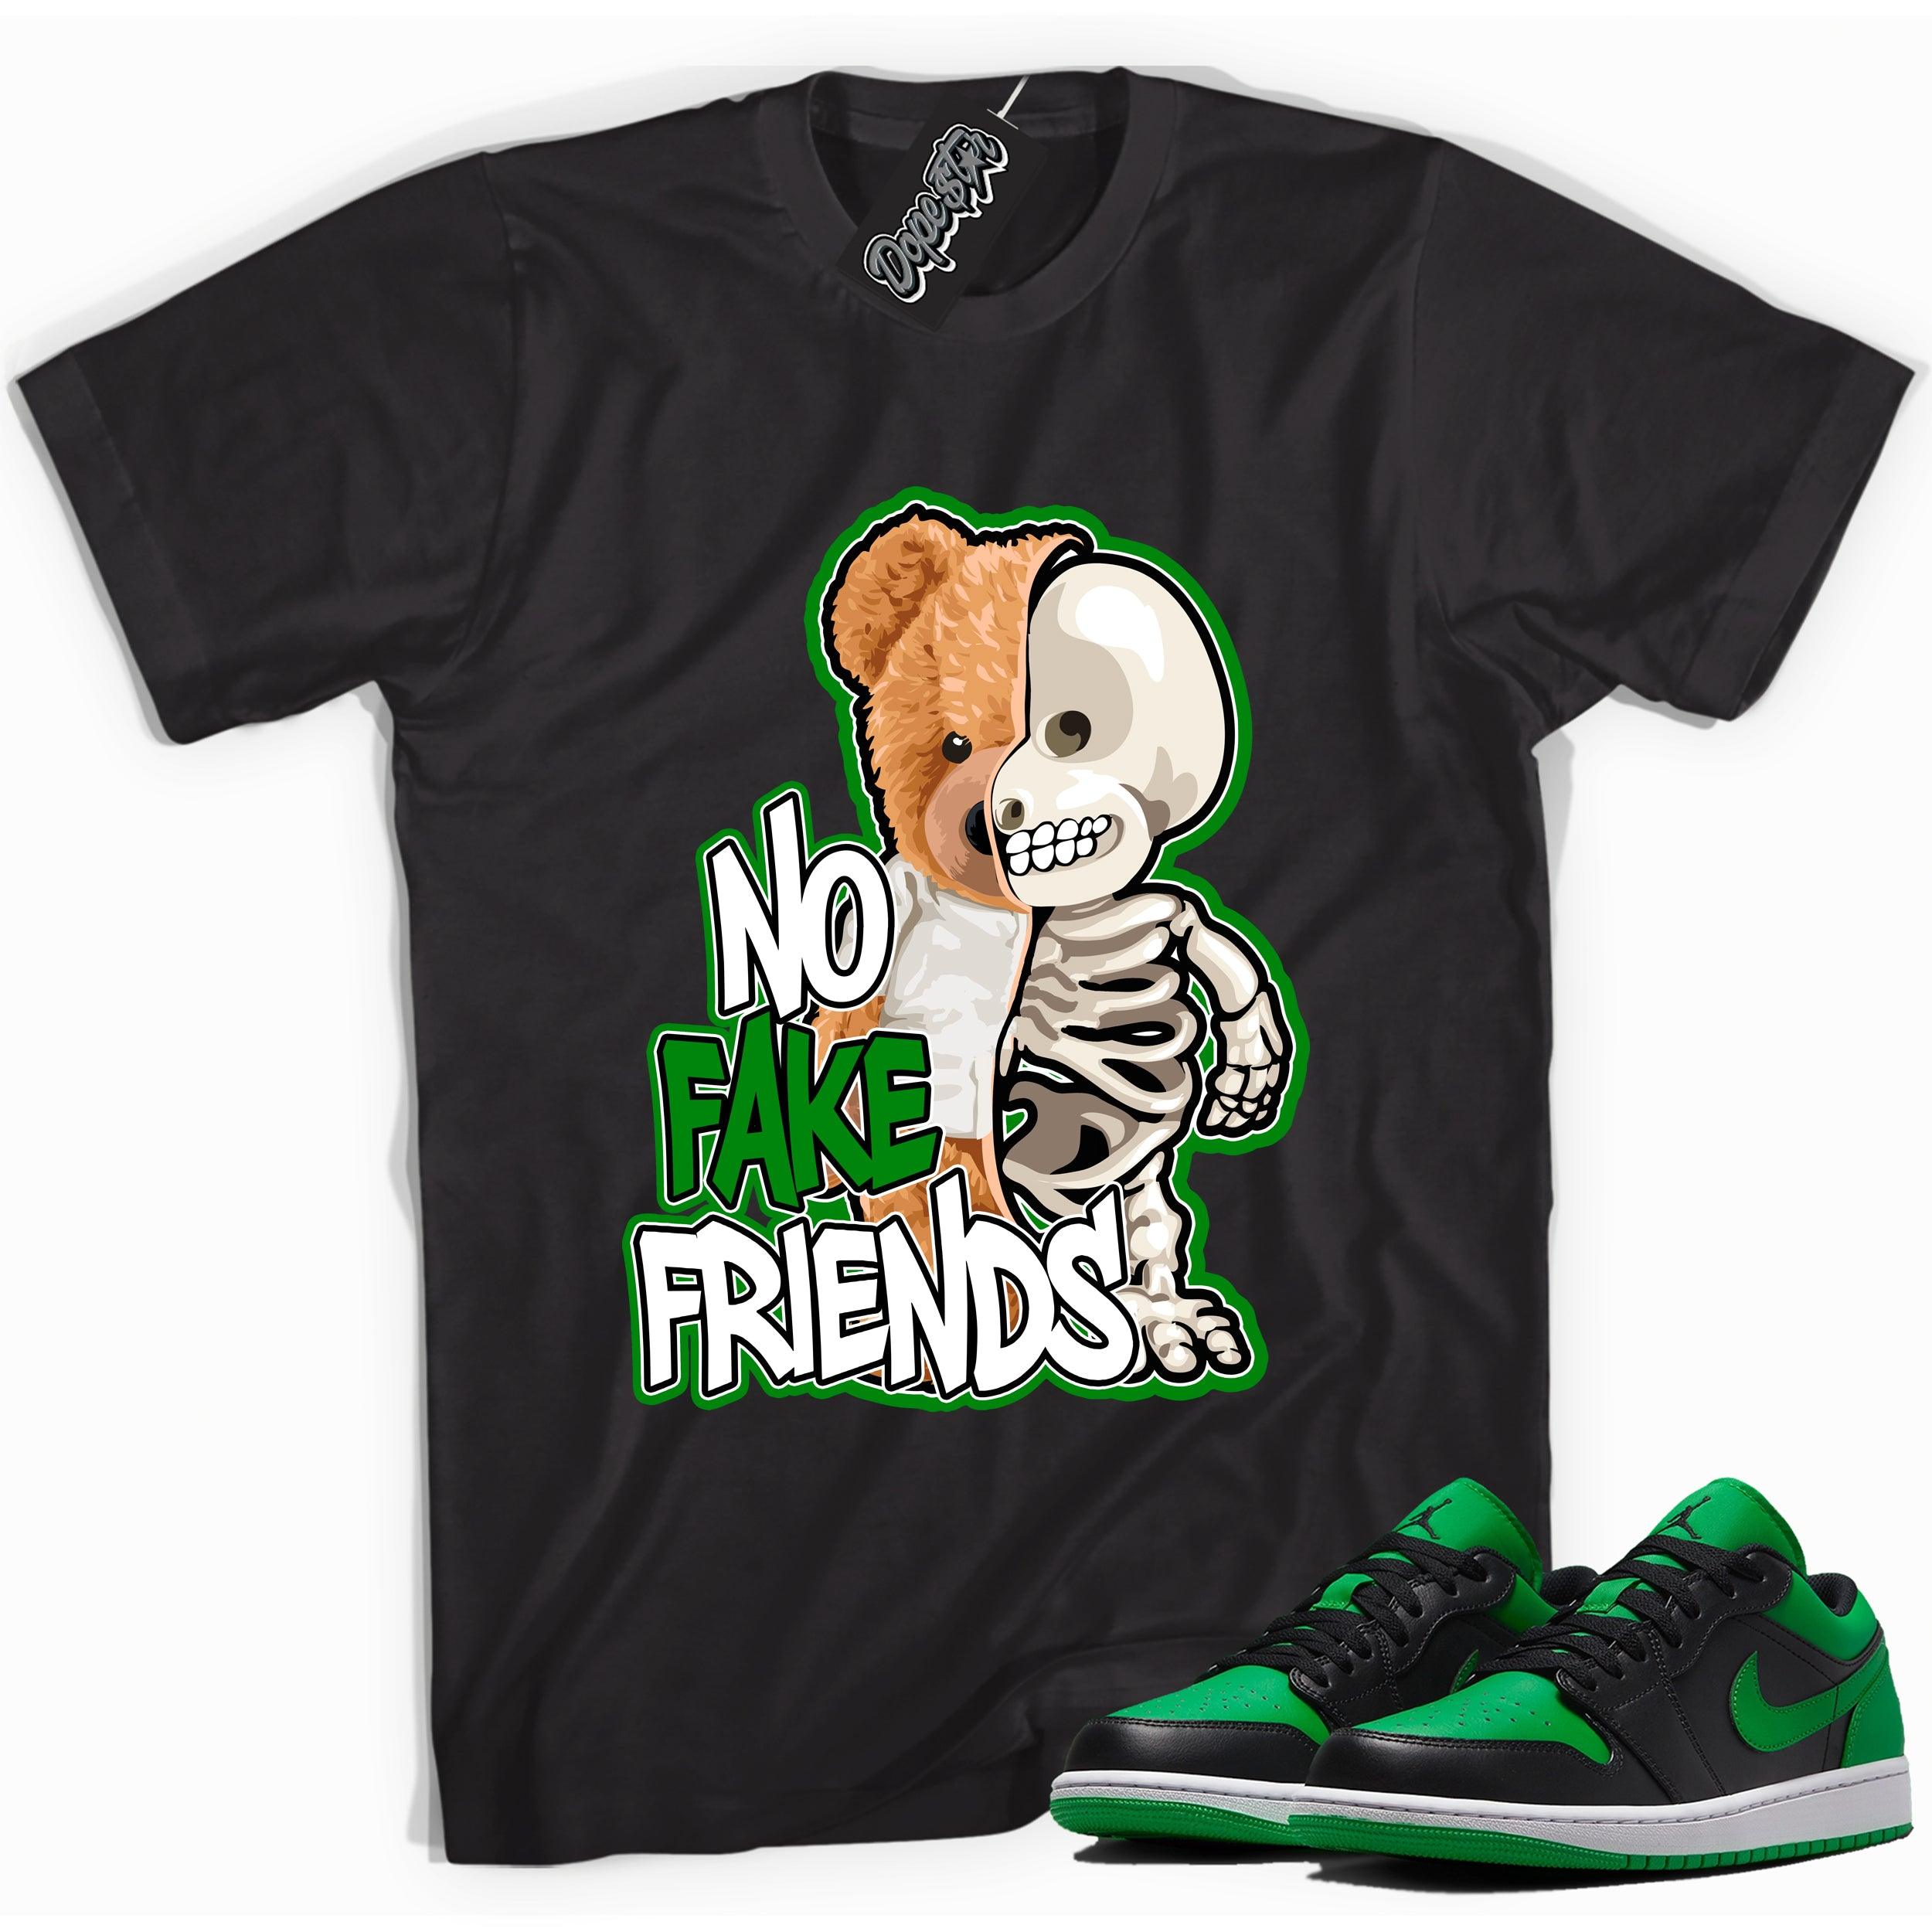 Cool black graphic tee with 'No Fake Friends' print, that perfectly matches Air Jordan 1 Low Lucky Green sneakers